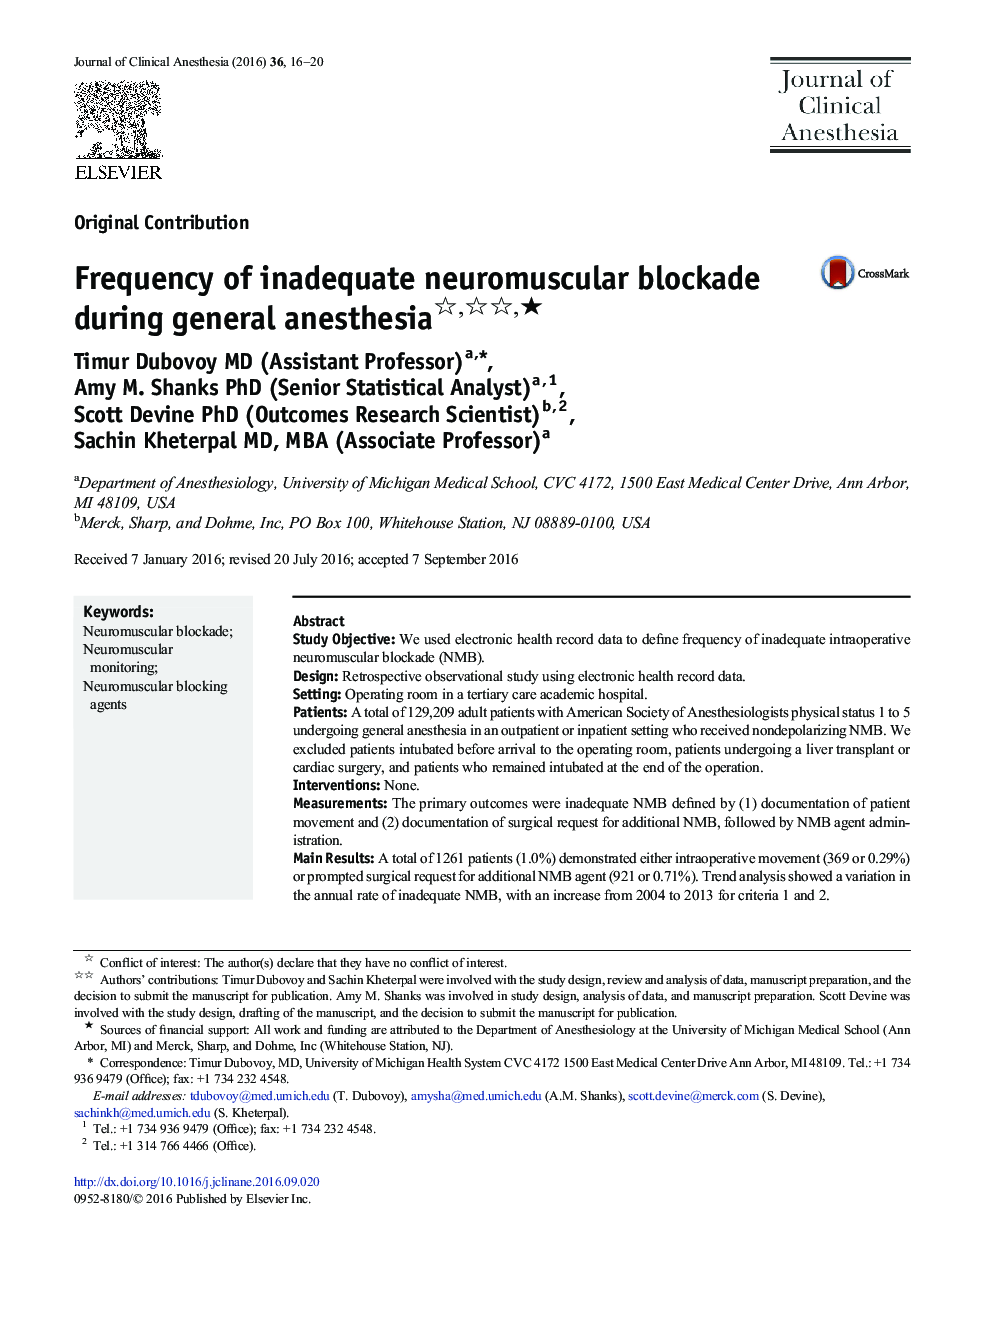 Frequency of inadequate neuromuscular blockade during general anesthesia